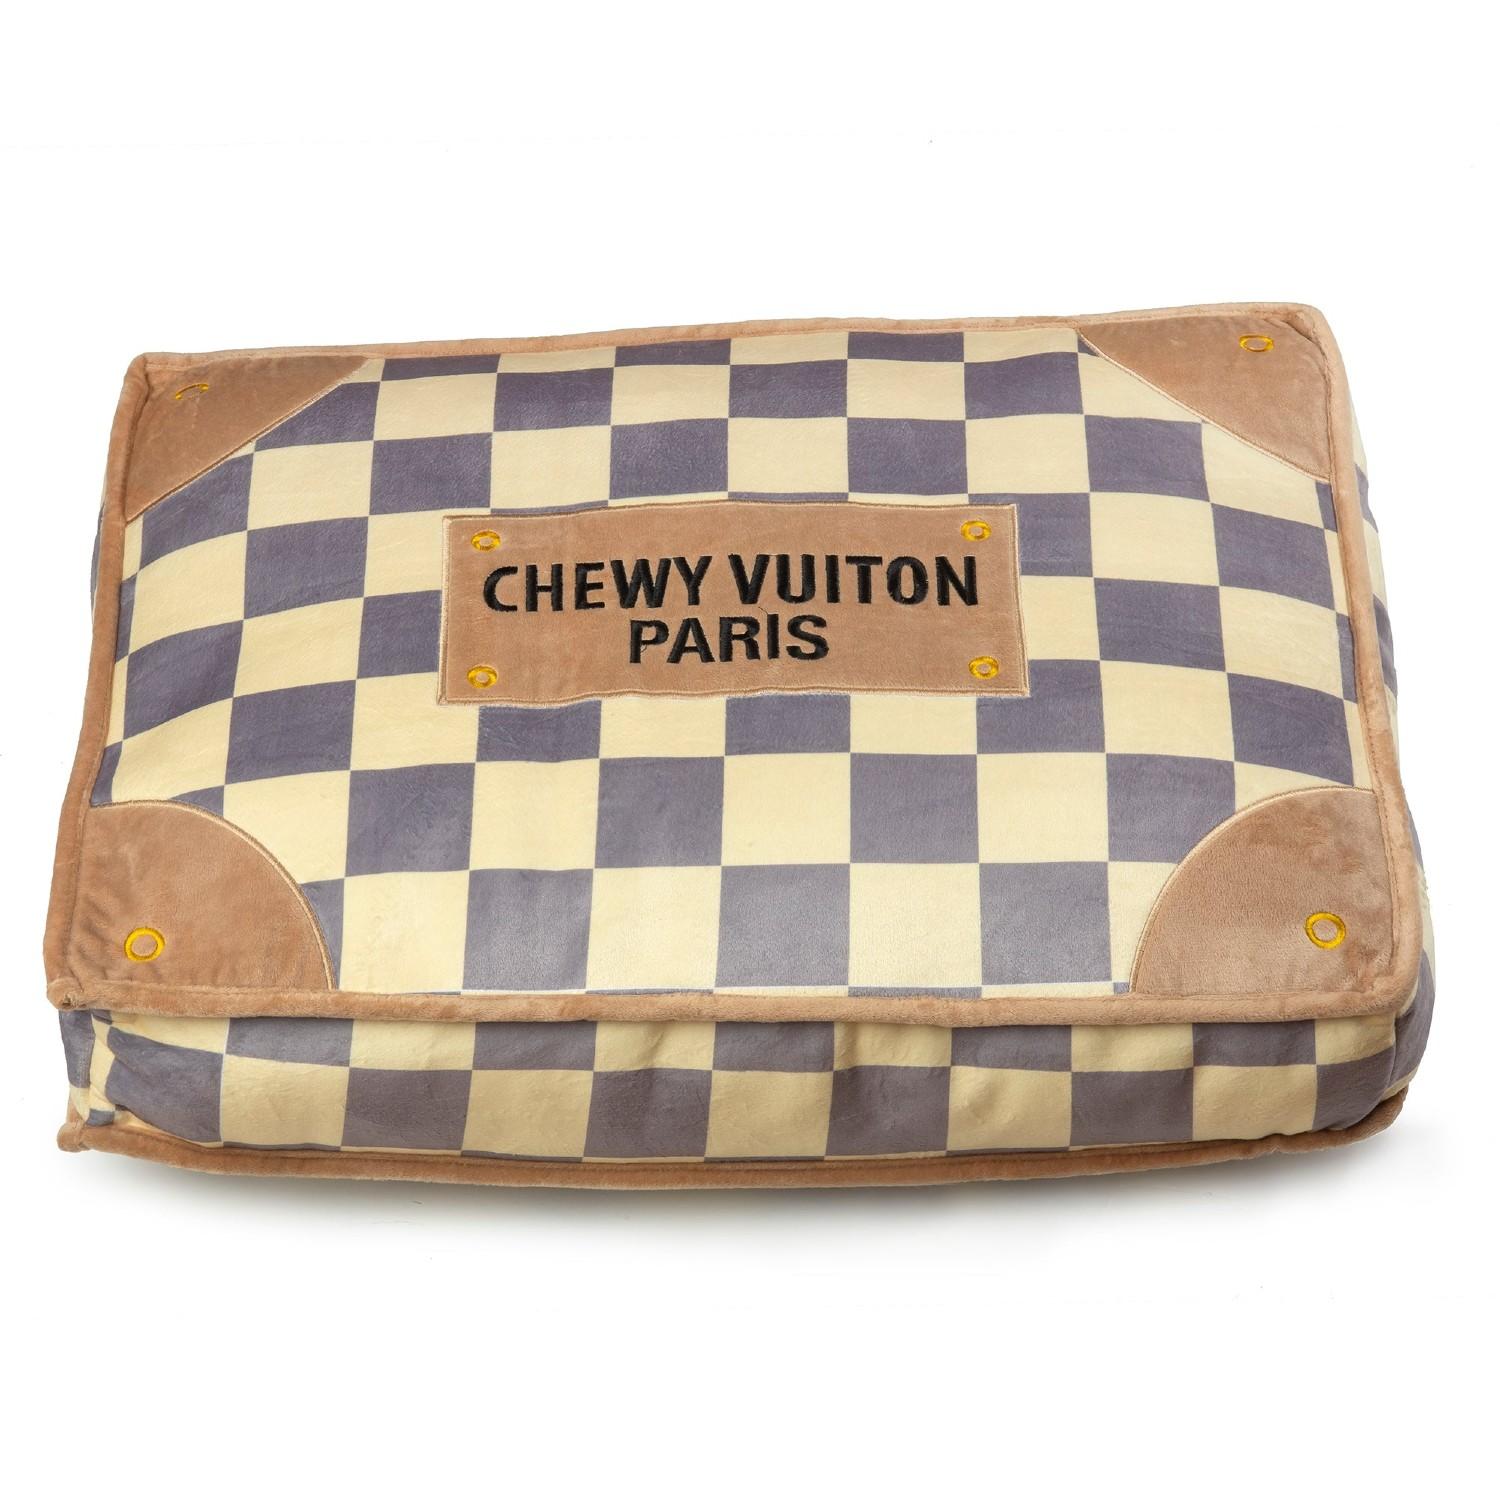 Haute Diggity Dog Chewy Vuiton Dog Bed - Checker